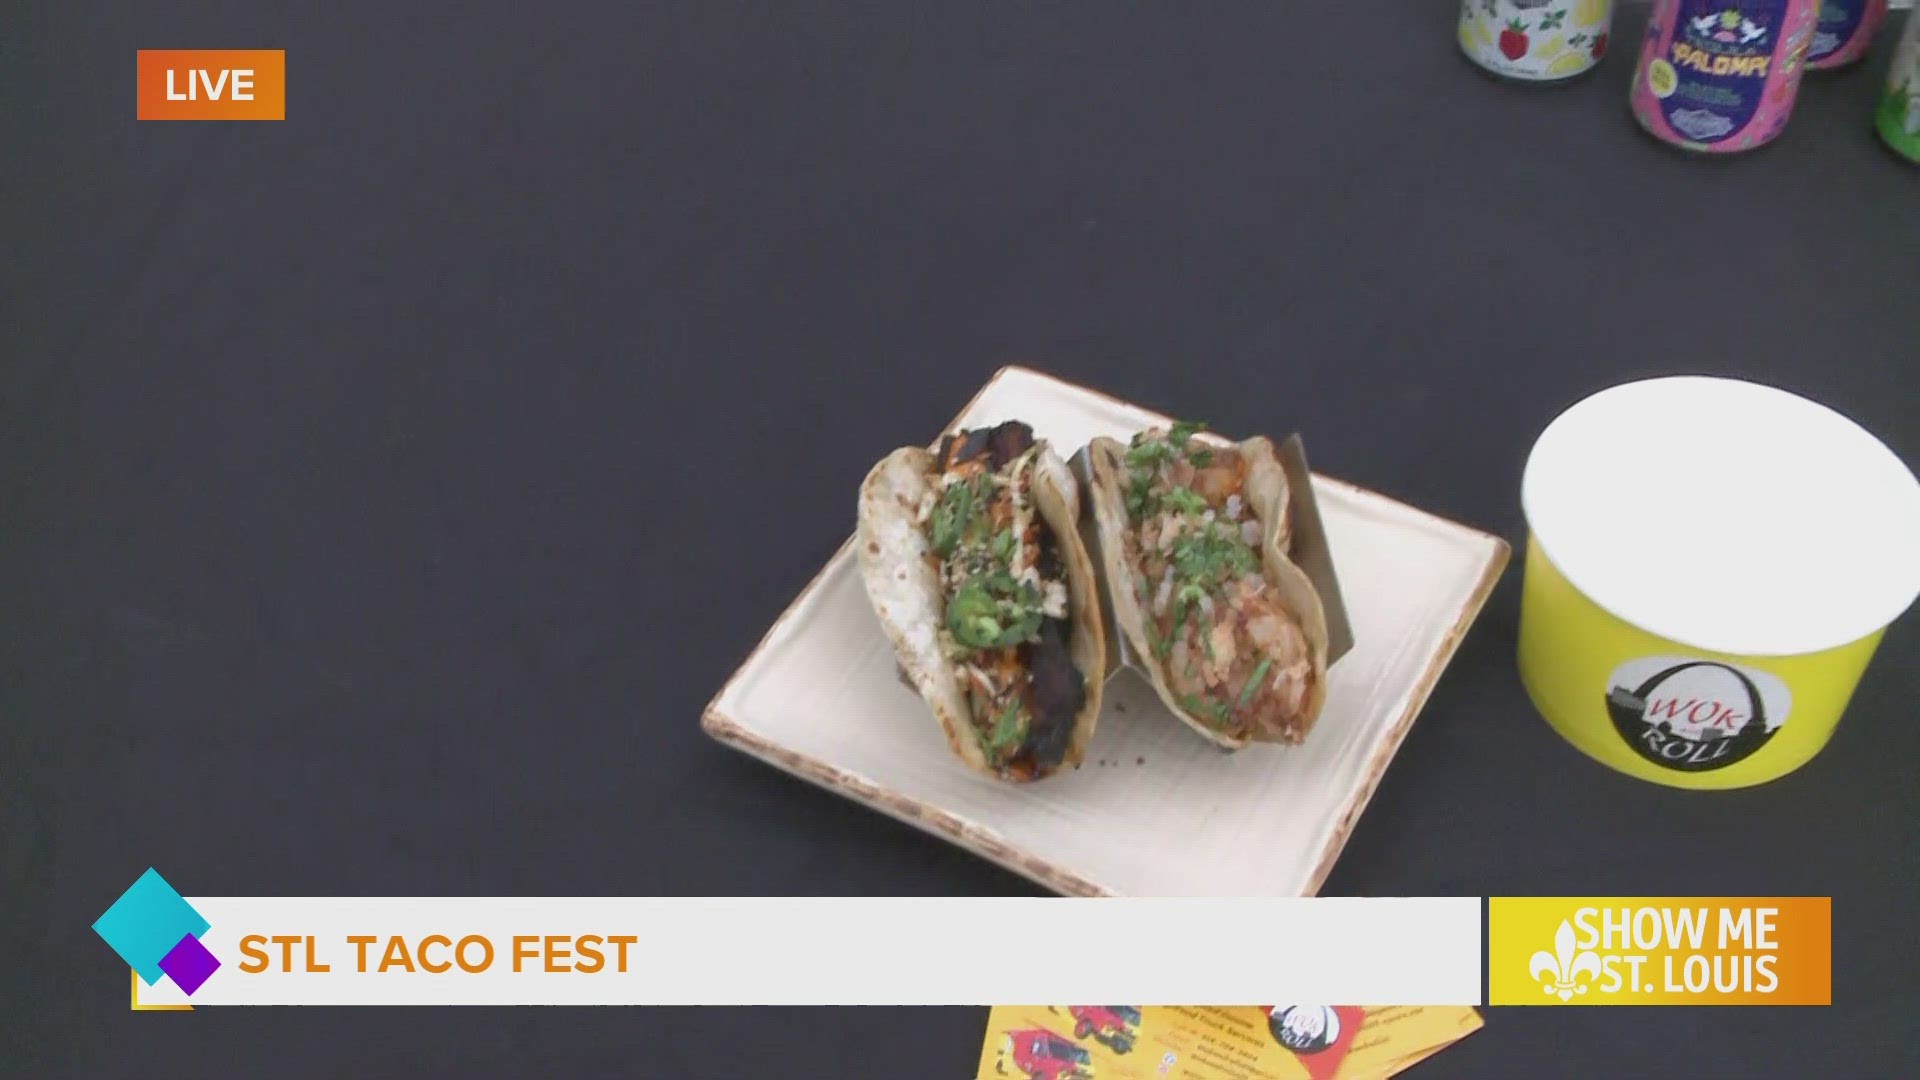 STL Taco Fest returns to Florissant for all taco lovers